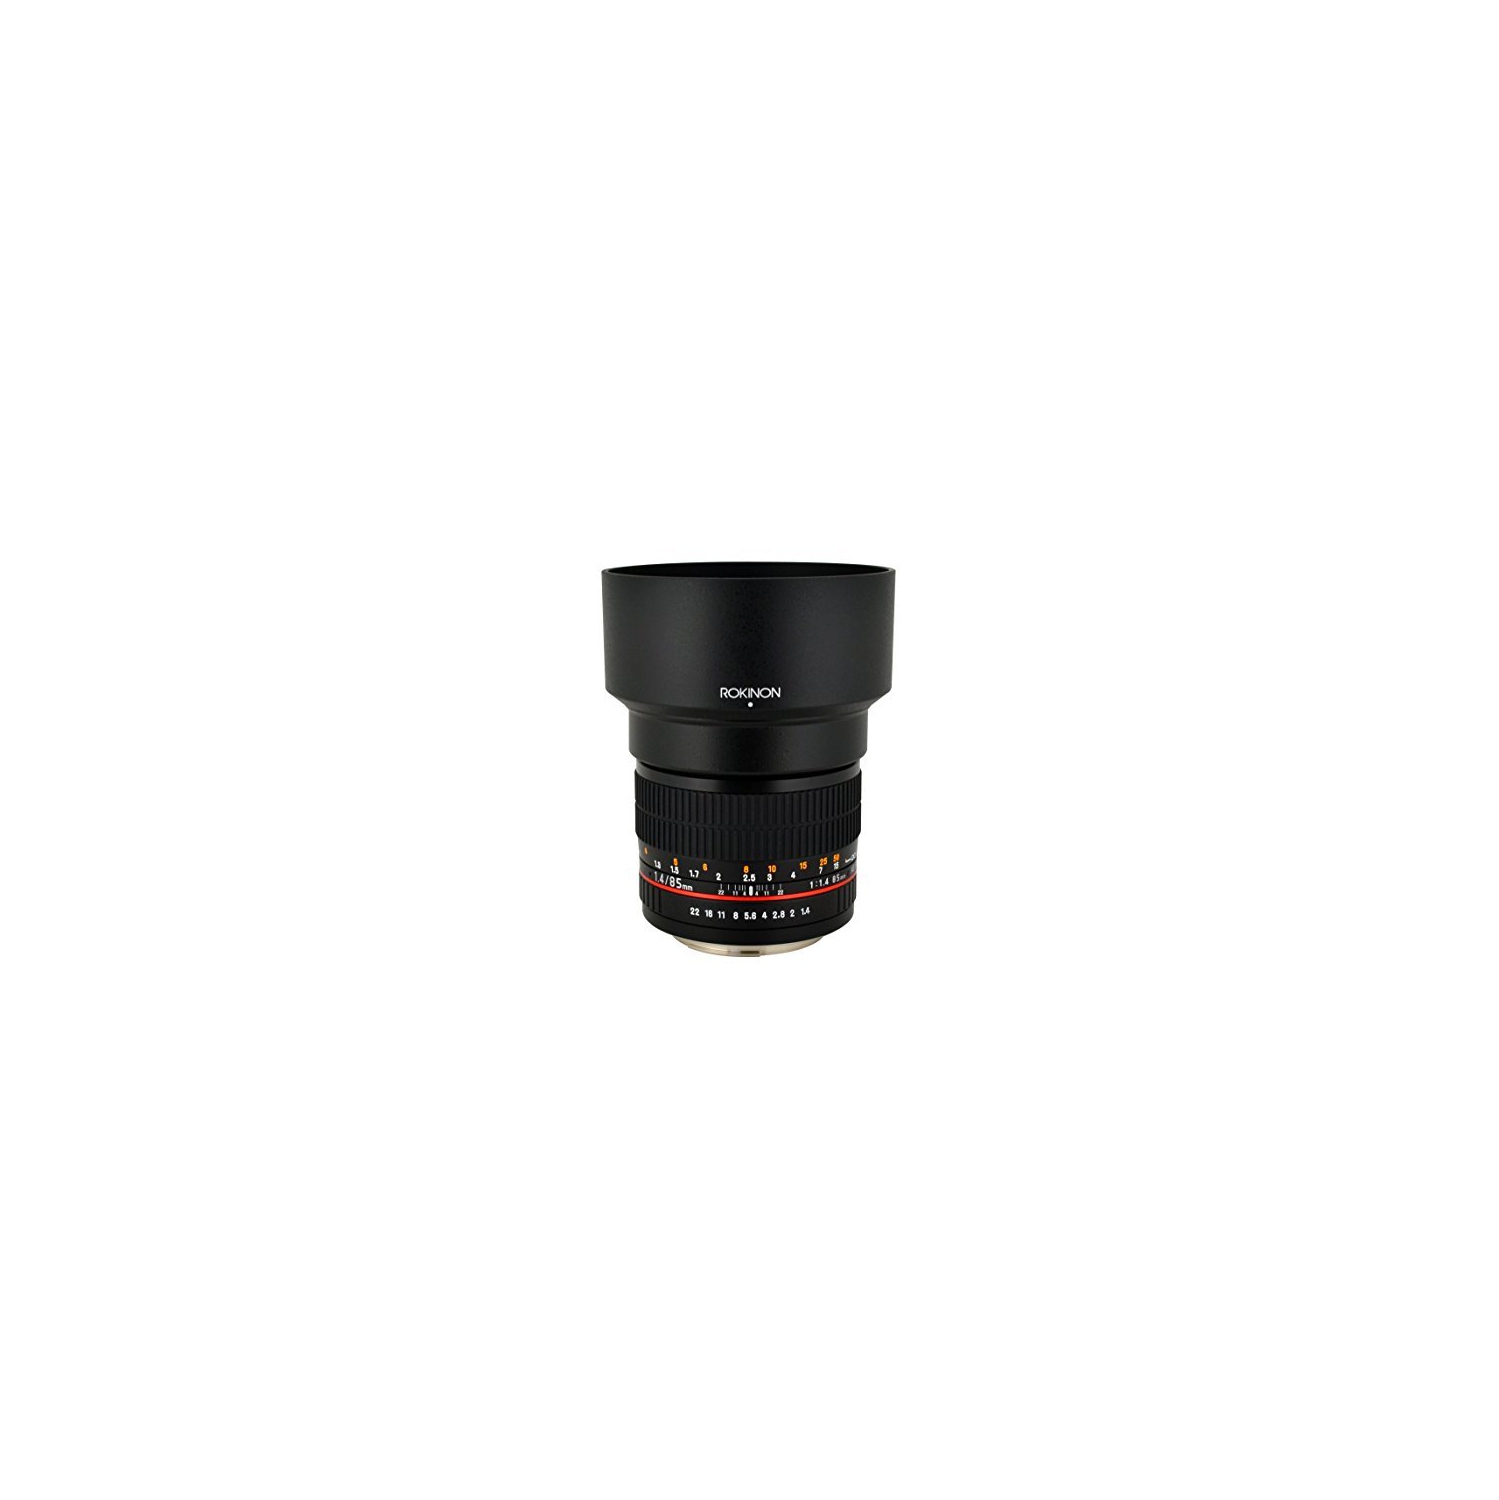 Elite Brands 85MAF-N Rokinon 85mm F1.4 Aspherical Lens for Nikon with AE Chip